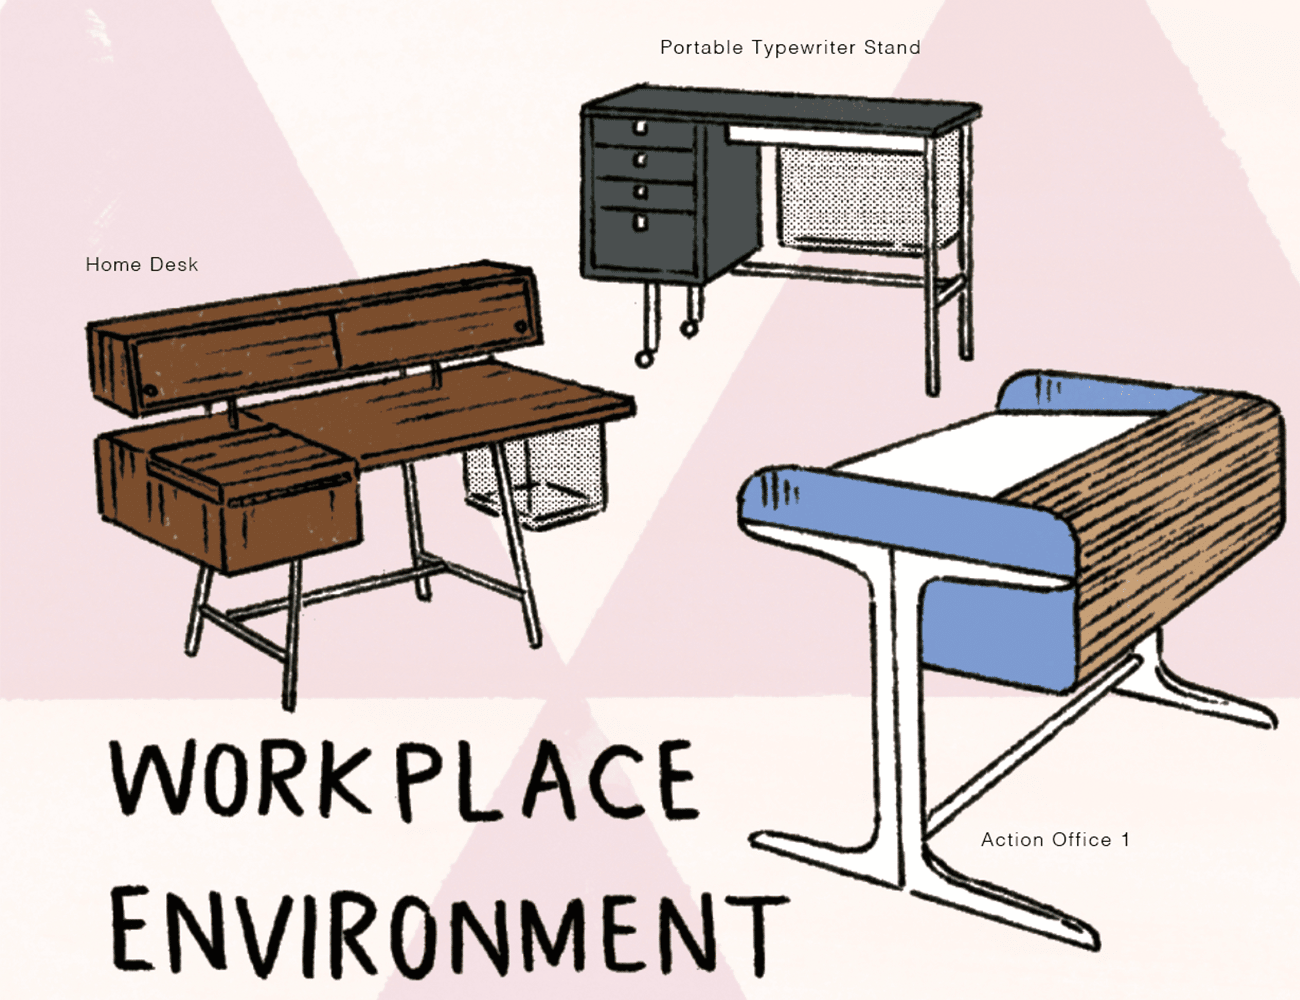 WORKPLACE ENVIRONMENT